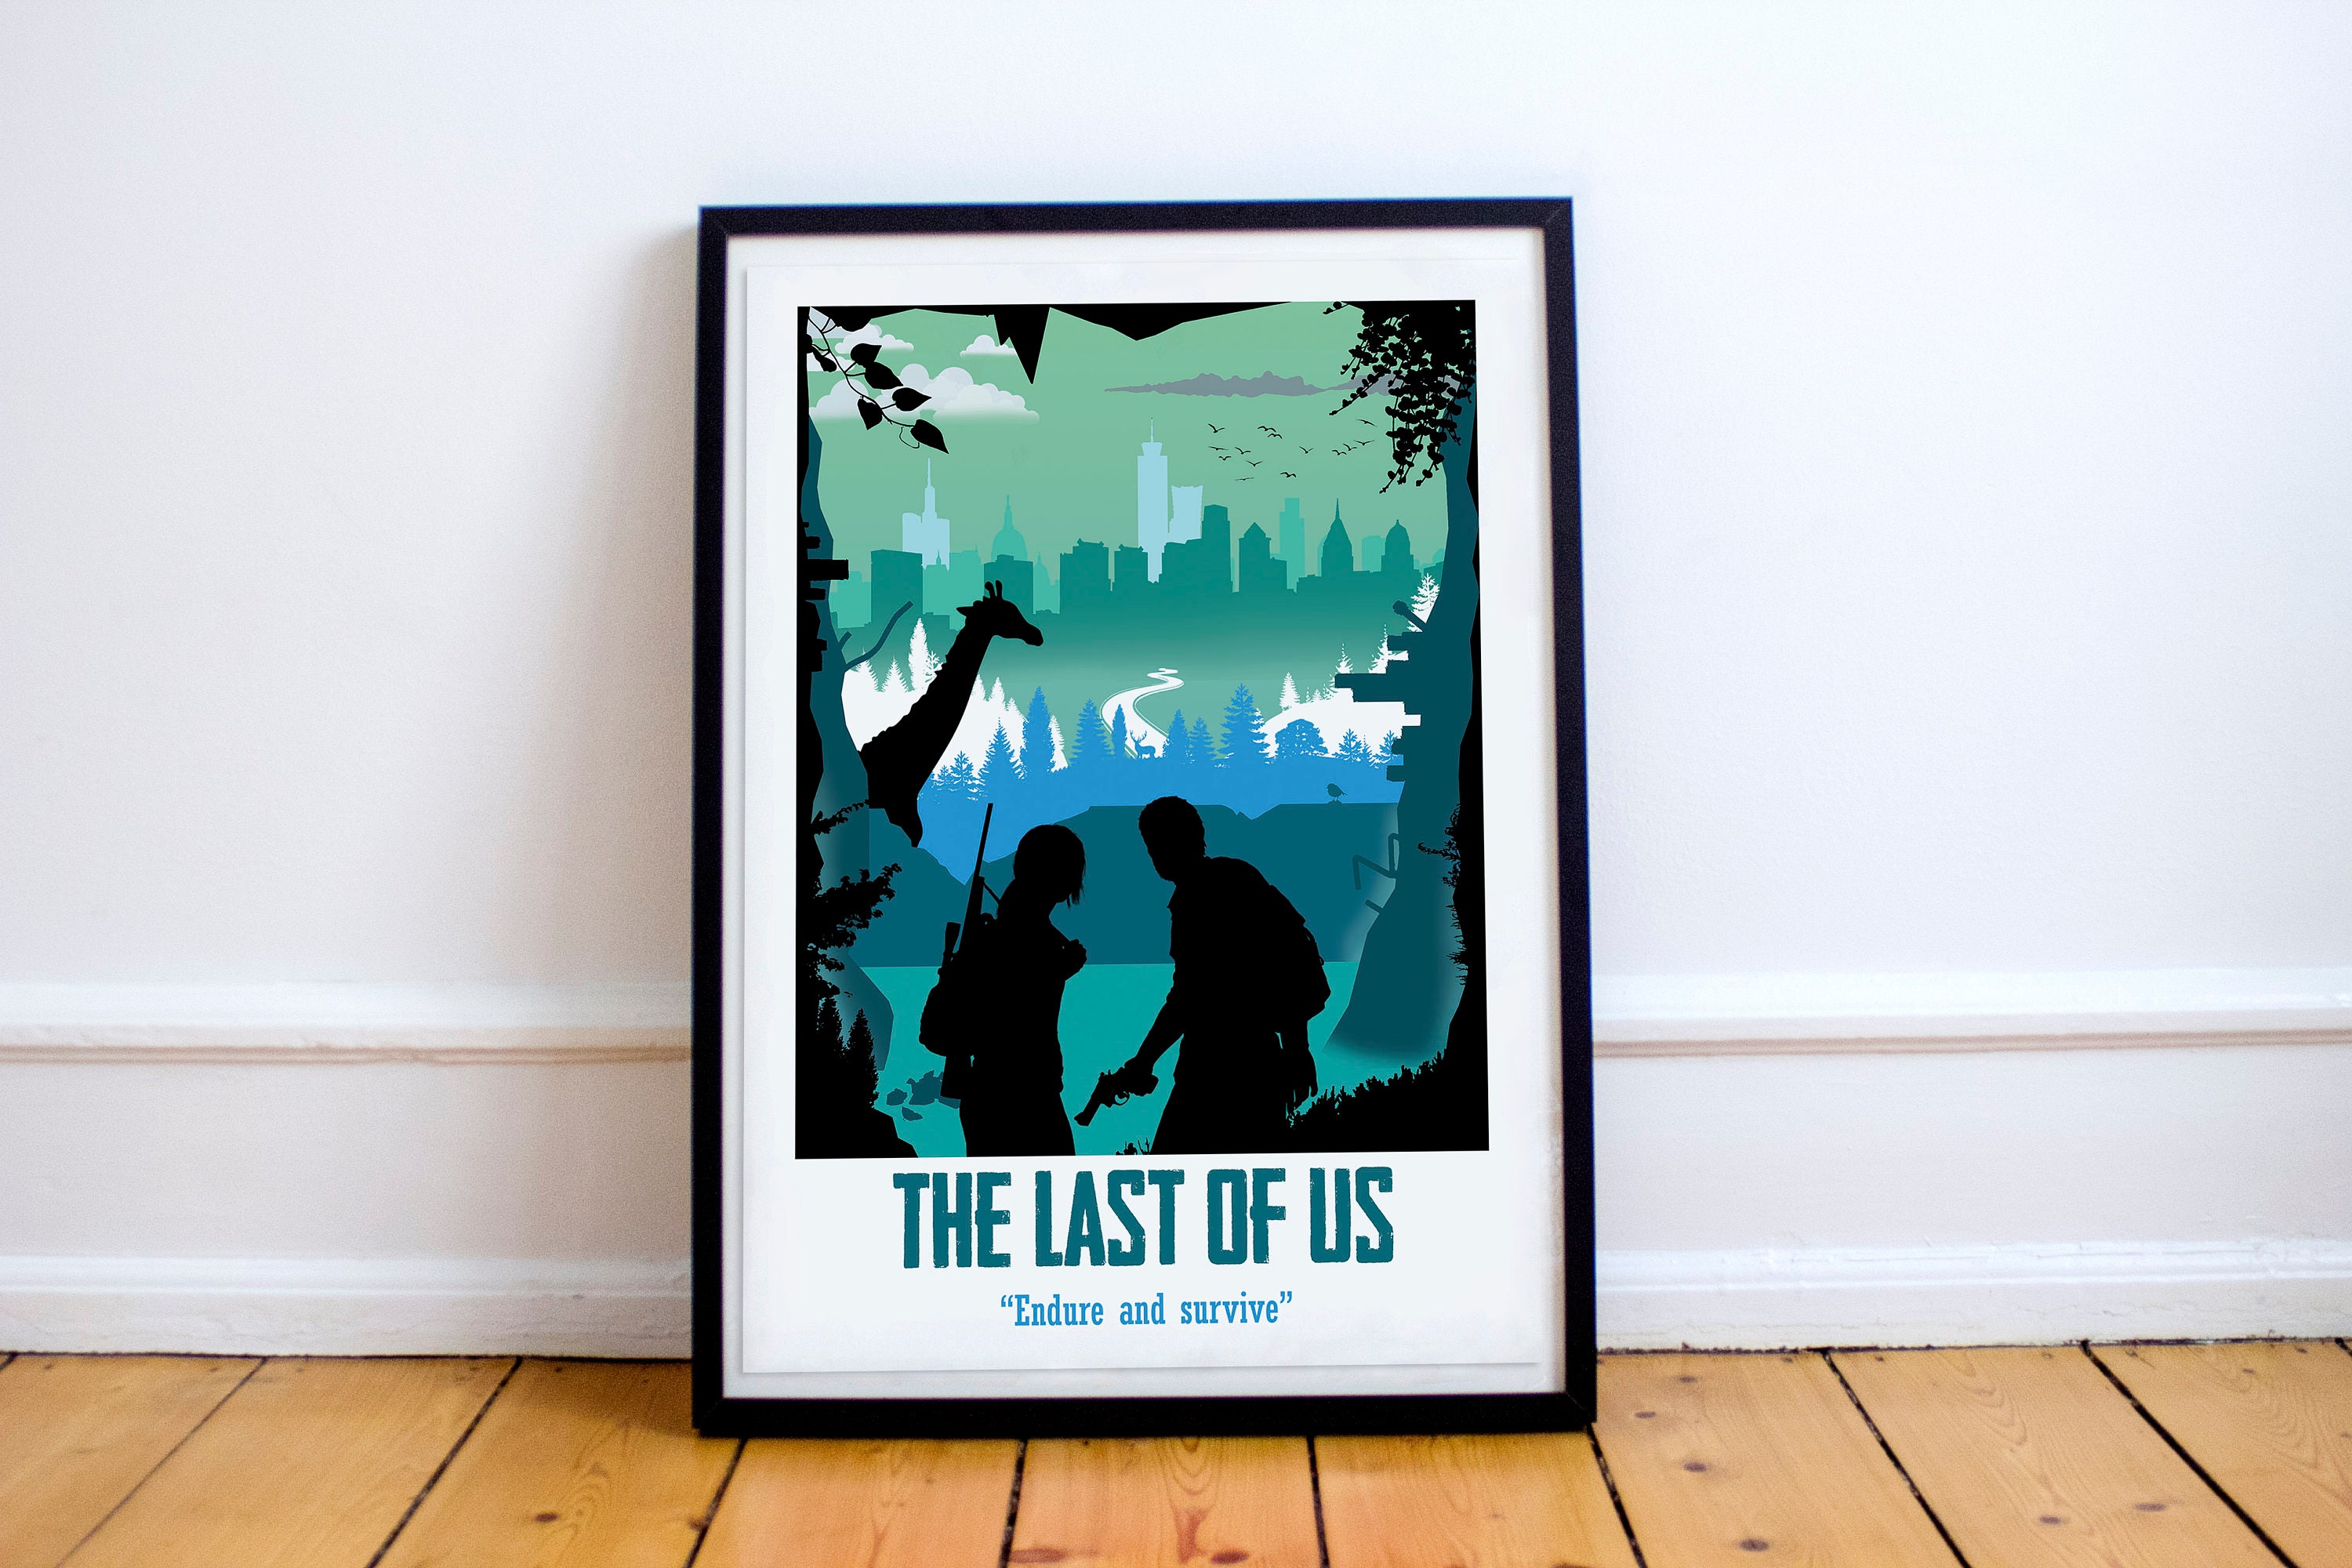 The Last of Us Game Art Minimalist Poster Home Decor - Etsy